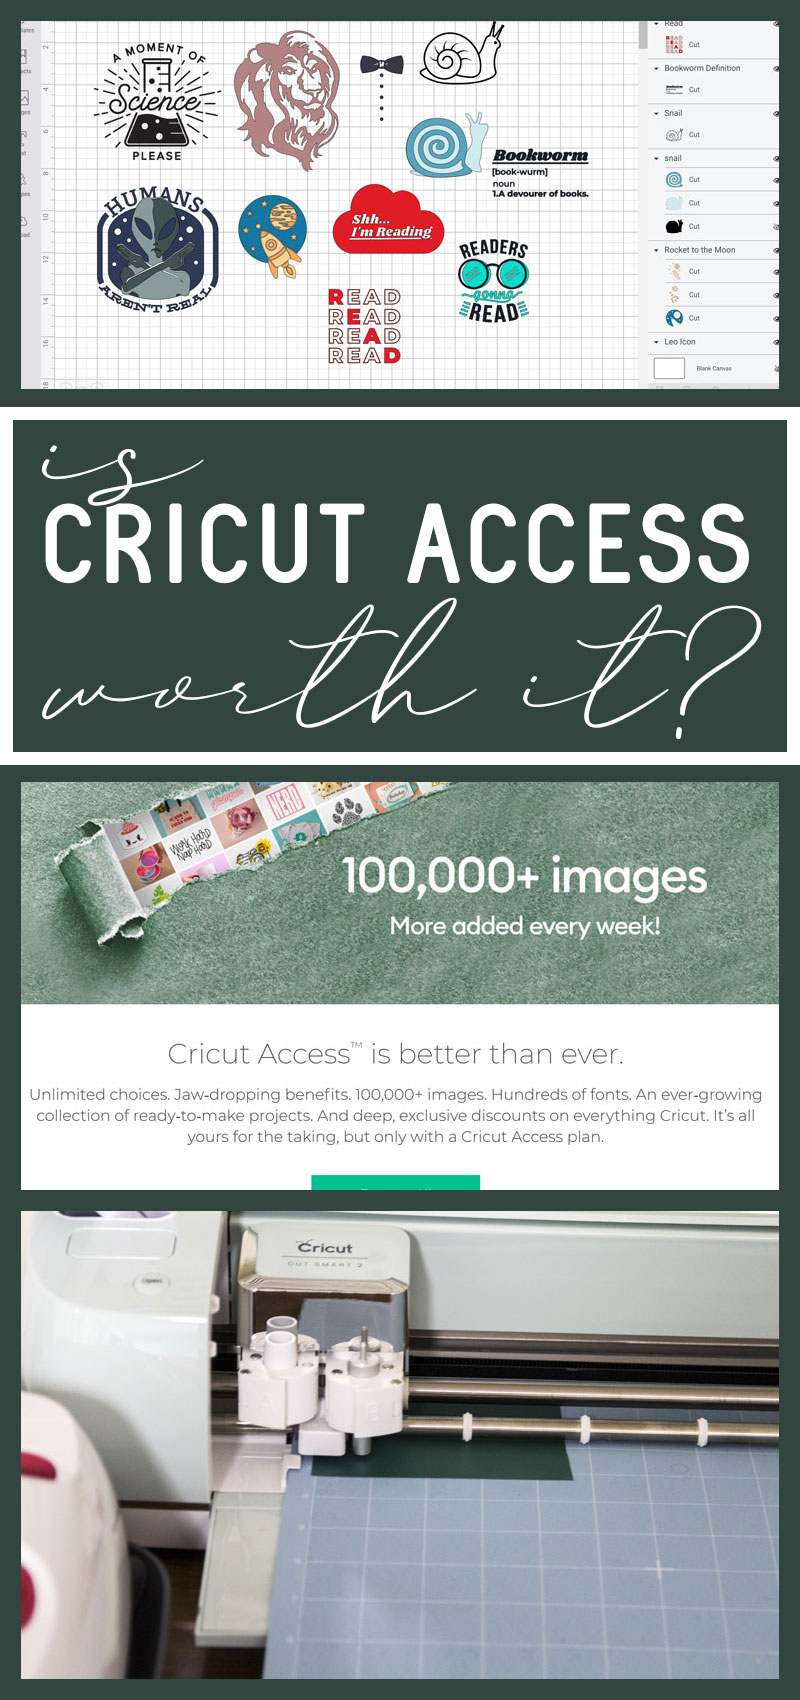 Is cricut access worth it? Title collage